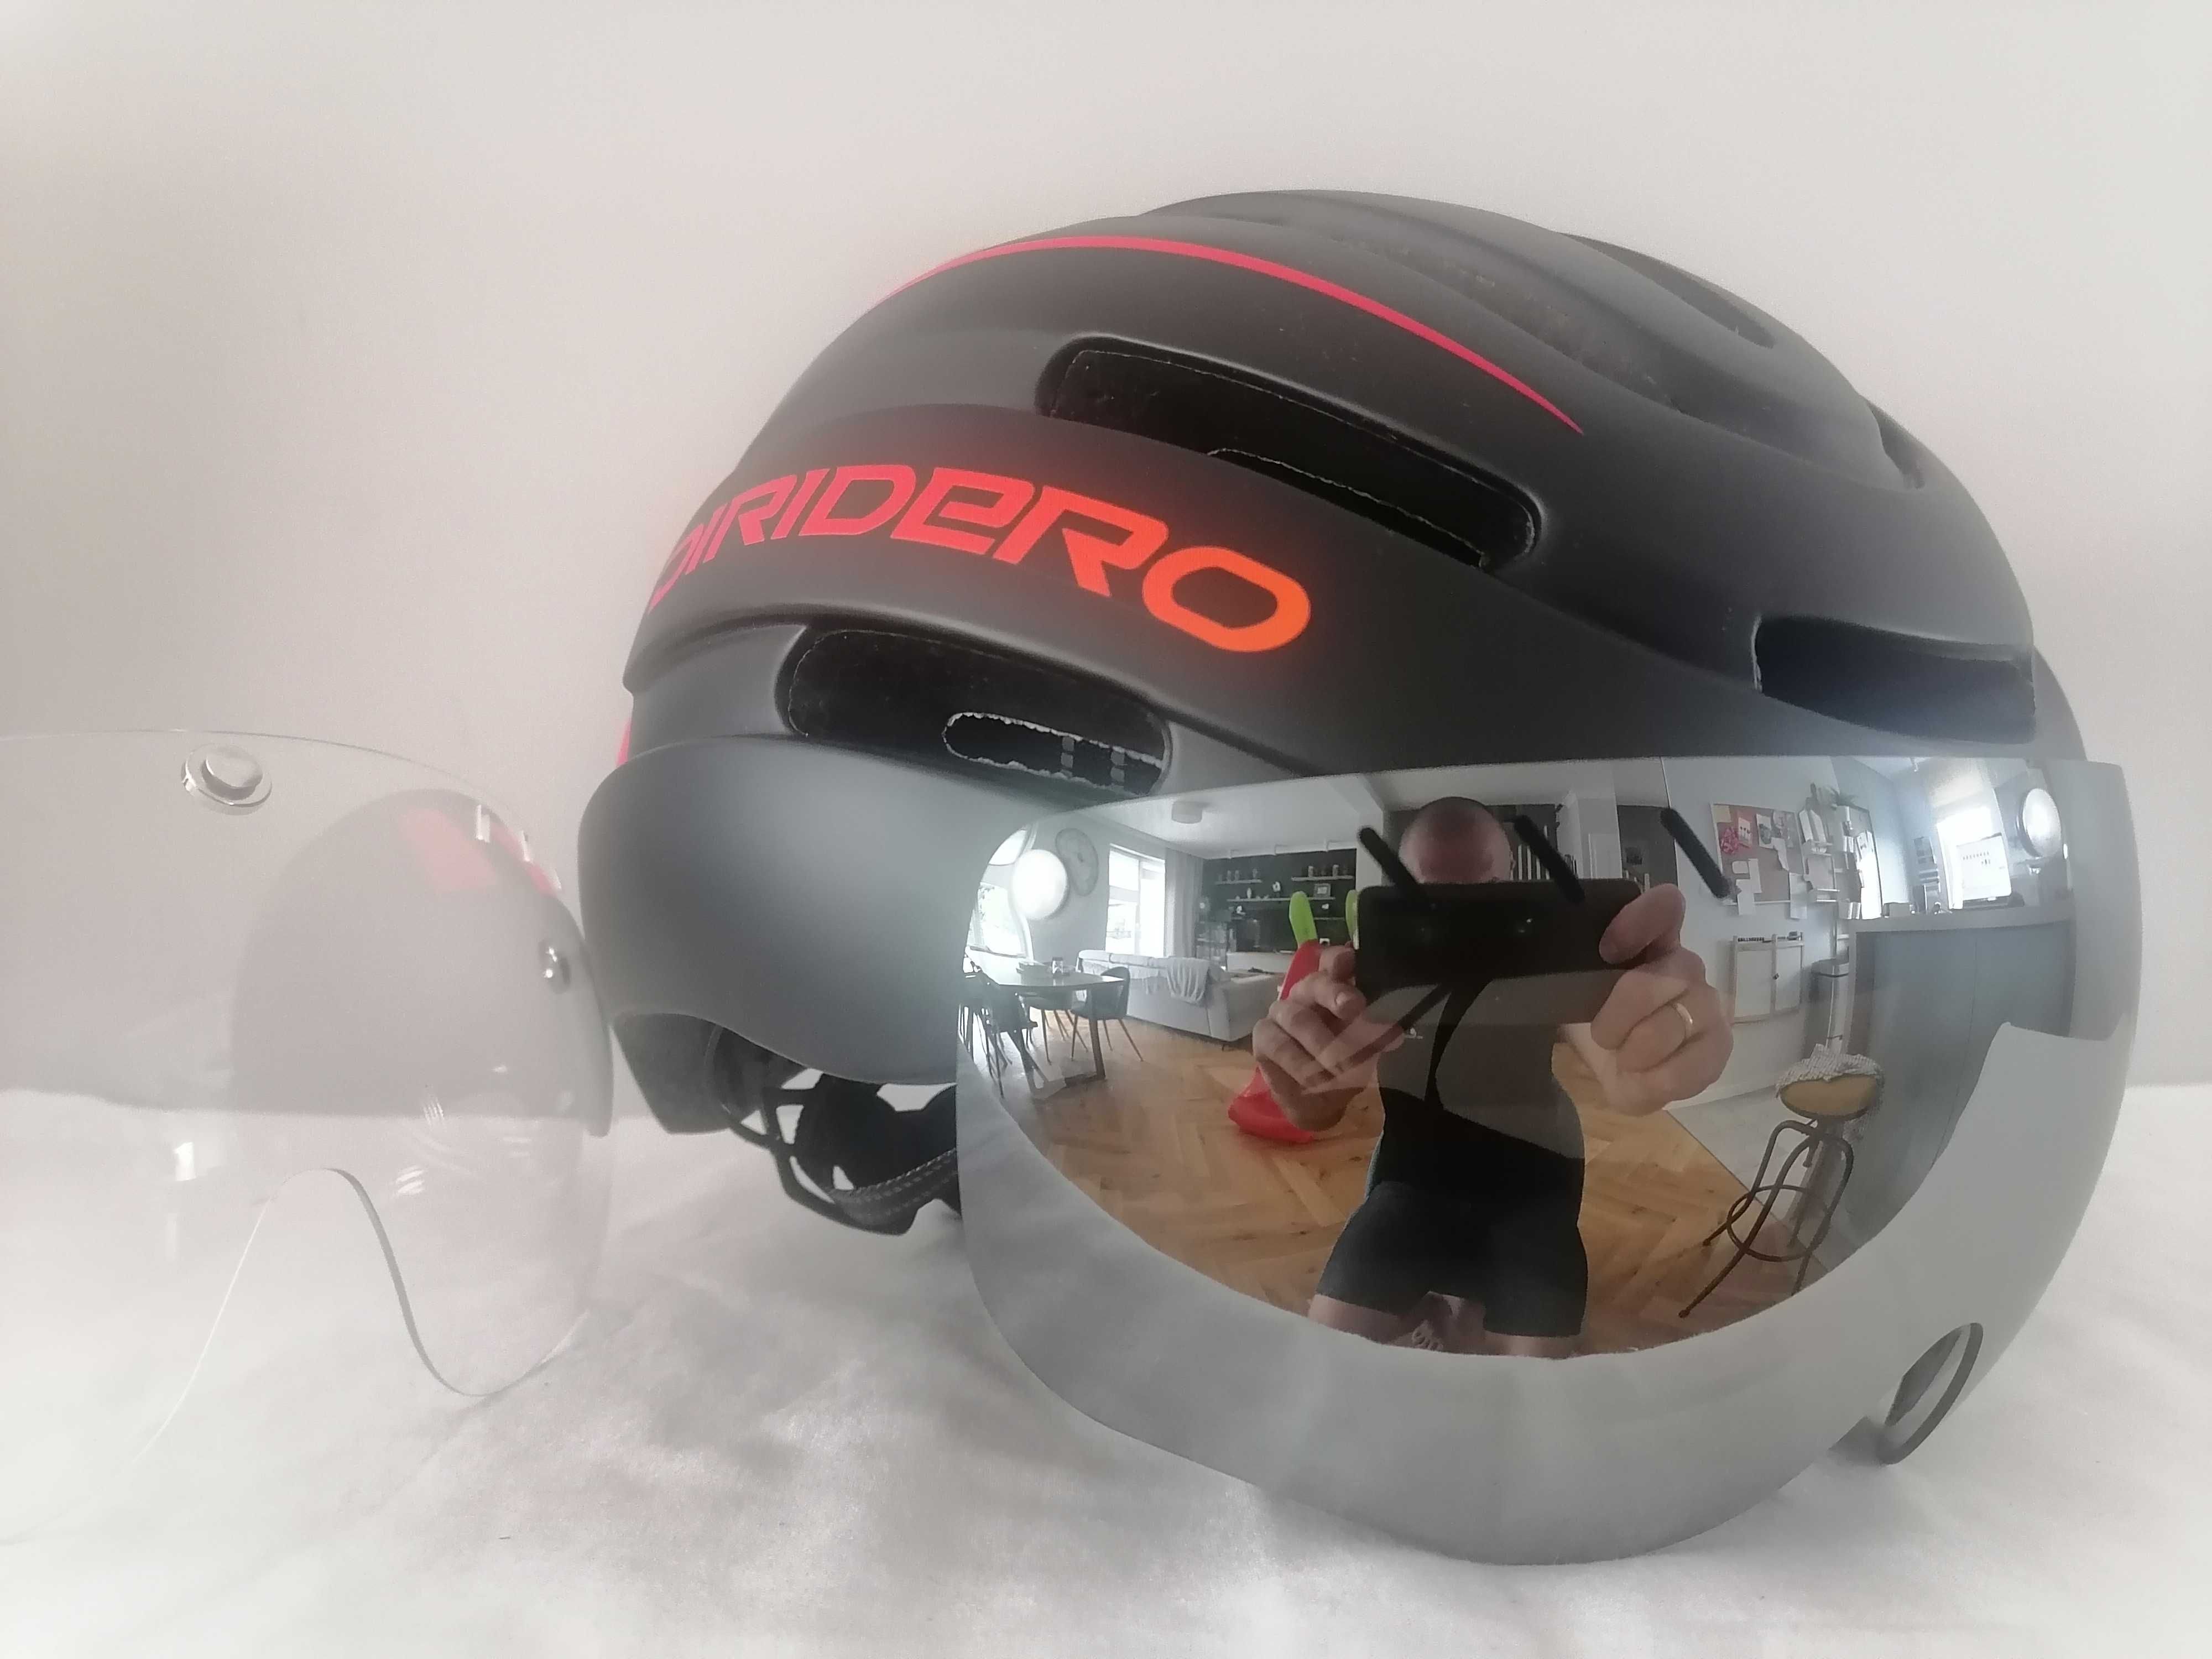 Kask rowerowy Diridero Rosso Nuovo Led L 57-62cm